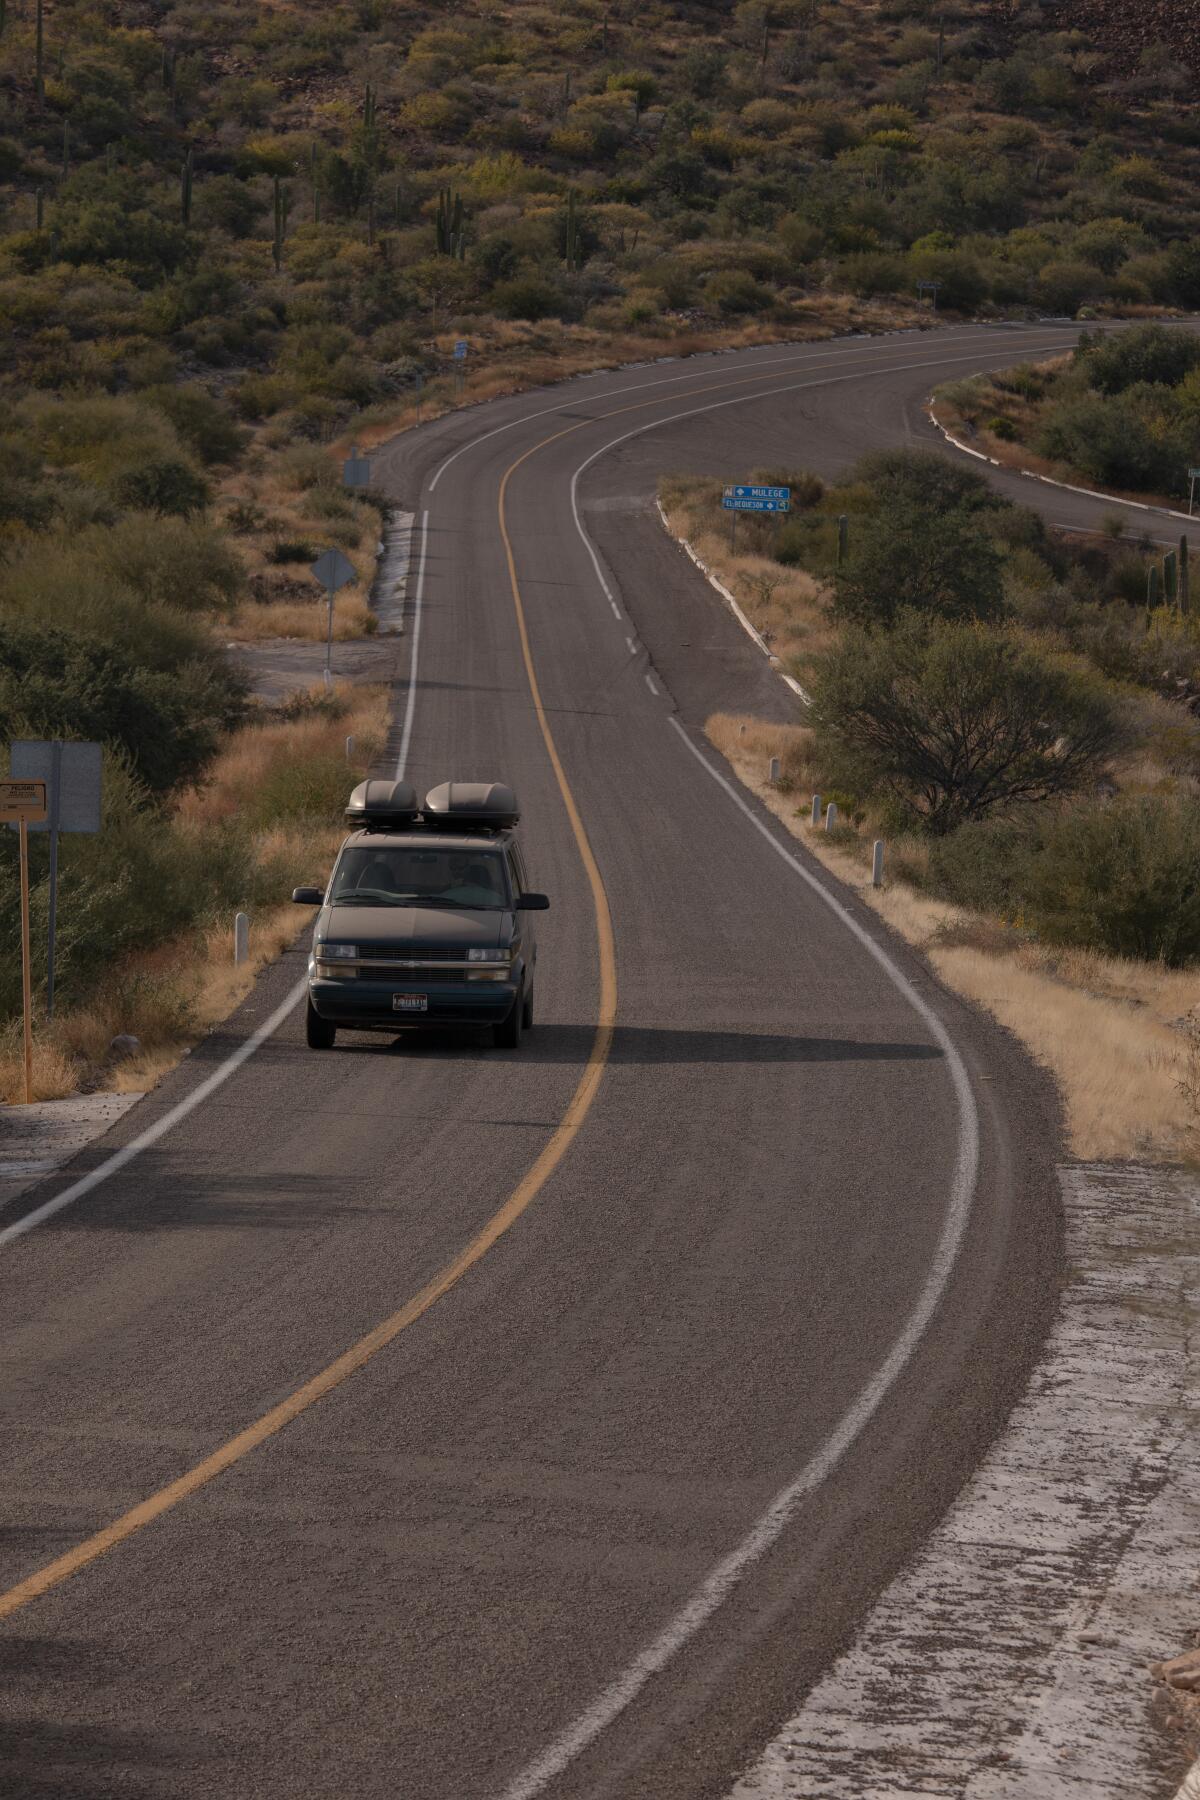 A southbound camper on Mexican Hwy. 1.